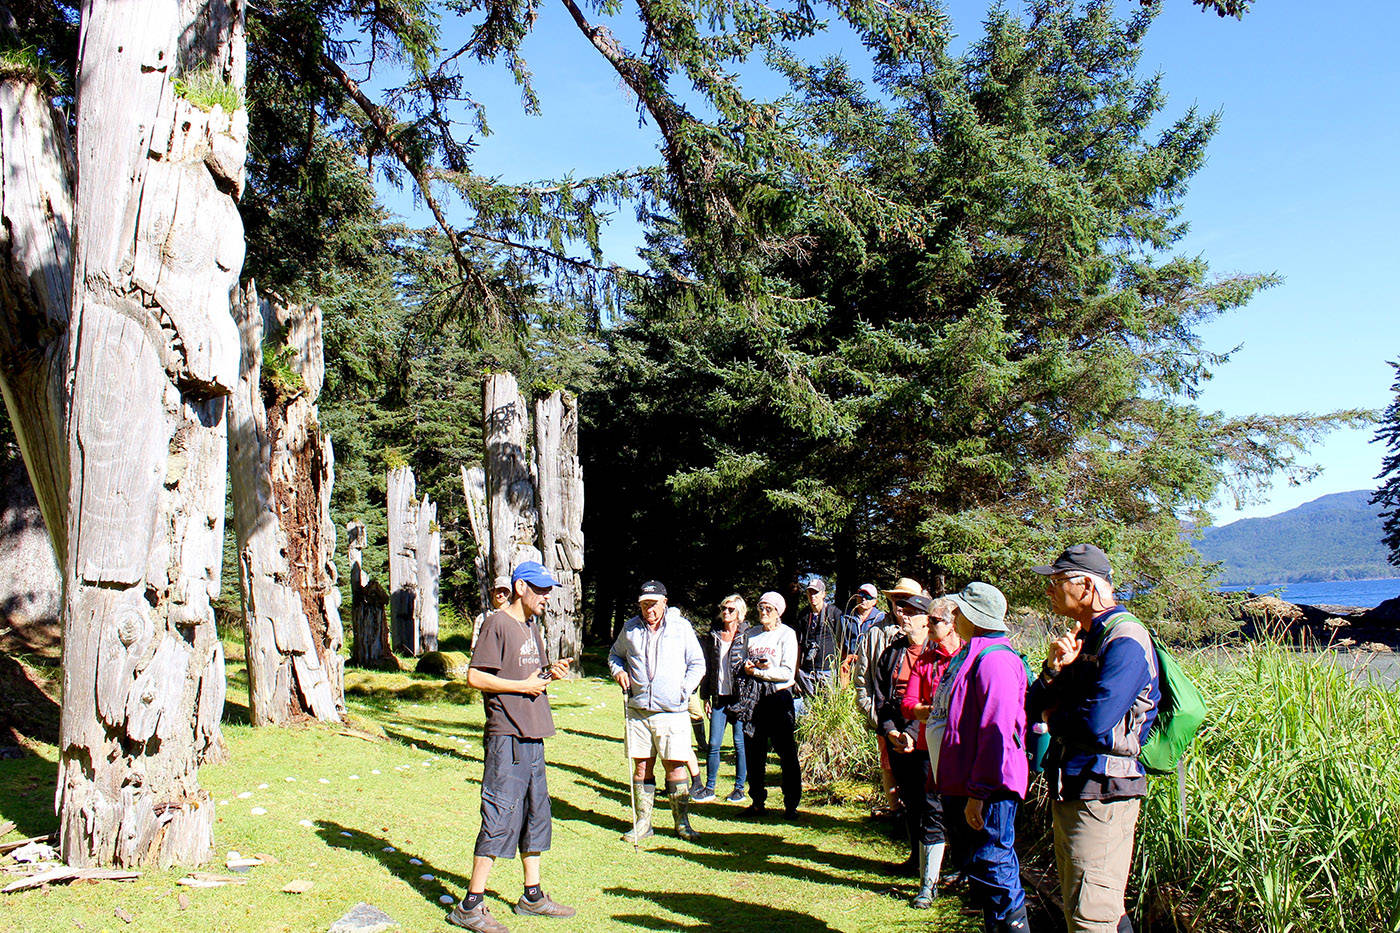 A Haida Watchman shows visitors around the Sgang Gwaay village site in 2017. (Photo: Amy Attas)